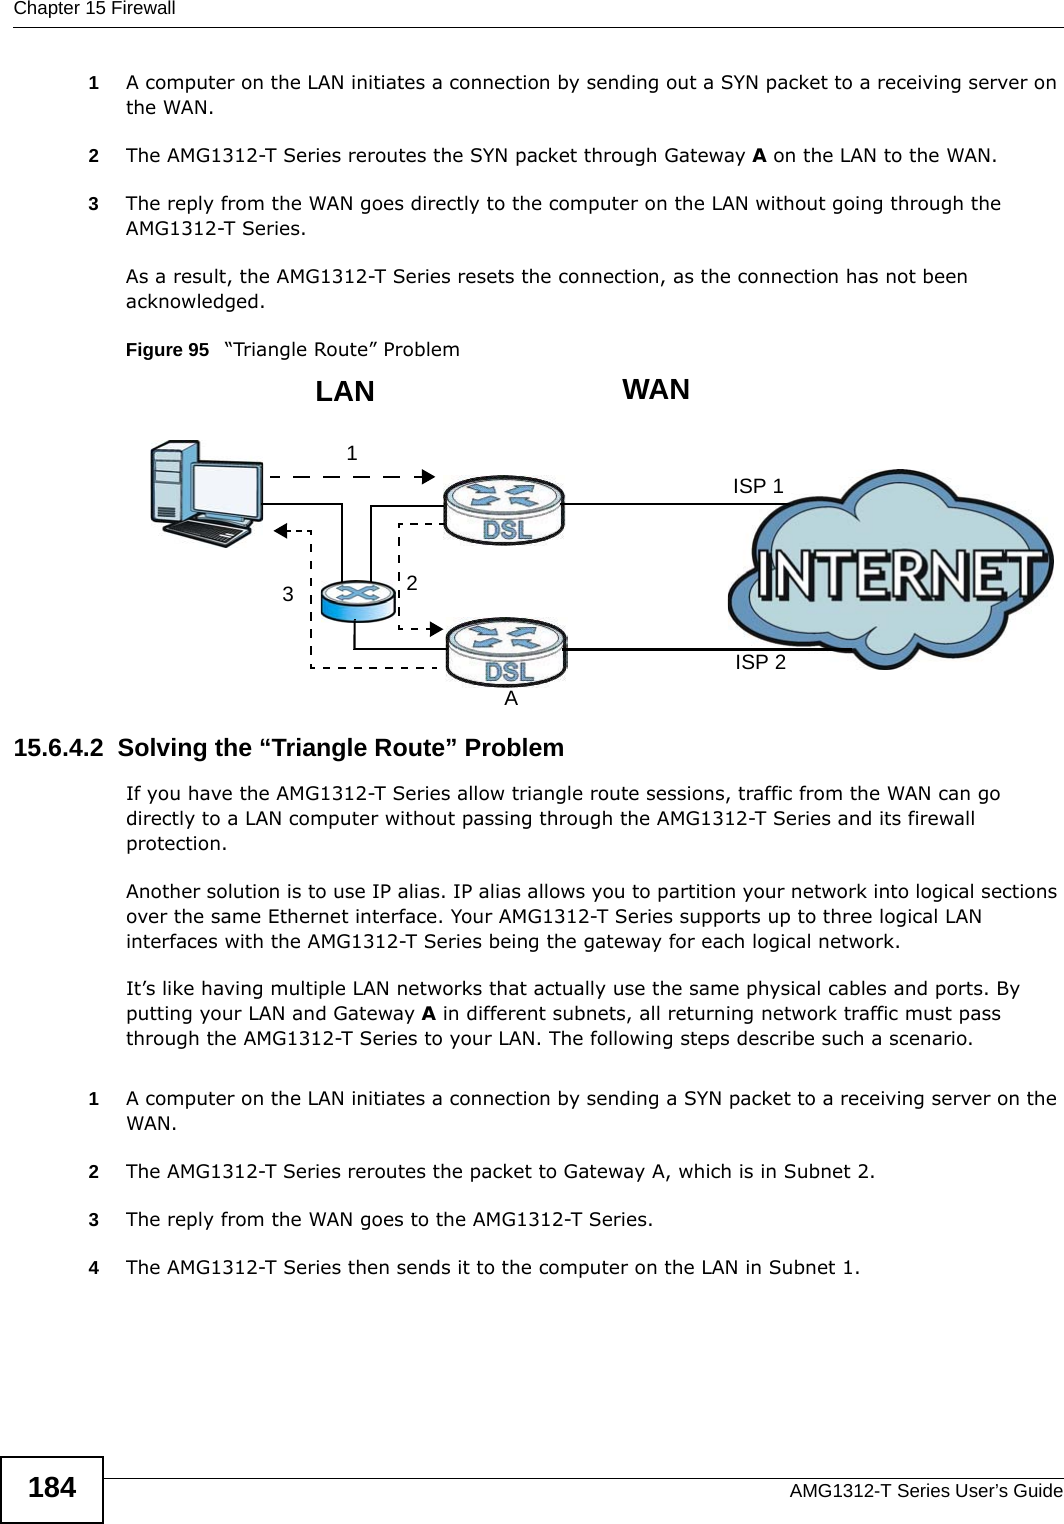 Chapter 15 FirewallAMG1312-T Series User’s Guide1841A computer on the LAN initiates a connection by sending out a SYN packet to a receiving server on the WAN.2The AMG1312-T Series reroutes the SYN packet through Gateway A on the LAN to the WAN. 3The reply from the WAN goes directly to the computer on the LAN without going through the AMG1312-T Series. As a result, the AMG1312-T Series resets the connection, as the connection has not been acknowledged.Figure 95   “Triangle Route” Problem15.6.4.2  Solving the “Triangle Route” ProblemIf you have the AMG1312-T Series allow triangle route sessions, traffic from the WAN can go directly to a LAN computer without passing through the AMG1312-T Series and its firewall protection. Another solution is to use IP alias. IP alias allows you to partition your network into logical sections over the same Ethernet interface. Your AMG1312-T Series supports up to three logical LAN interfaces with the AMG1312-T Series being the gateway for each logical network. It’s like having multiple LAN networks that actually use the same physical cables and ports. By putting your LAN and Gateway A in different subnets, all returning network traffic must pass through the AMG1312-T Series to your LAN. The following steps describe such a scenario.1A computer on the LAN initiates a connection by sending a SYN packet to a receiving server on the WAN. 2The AMG1312-T Series reroutes the packet to Gateway A, which is in Subnet 2. 3The reply from the WAN goes to the AMG1312-T Series. 4The AMG1312-T Series then sends it to the computer on the LAN in Subnet 1.123WANLANAISP 1ISP 2